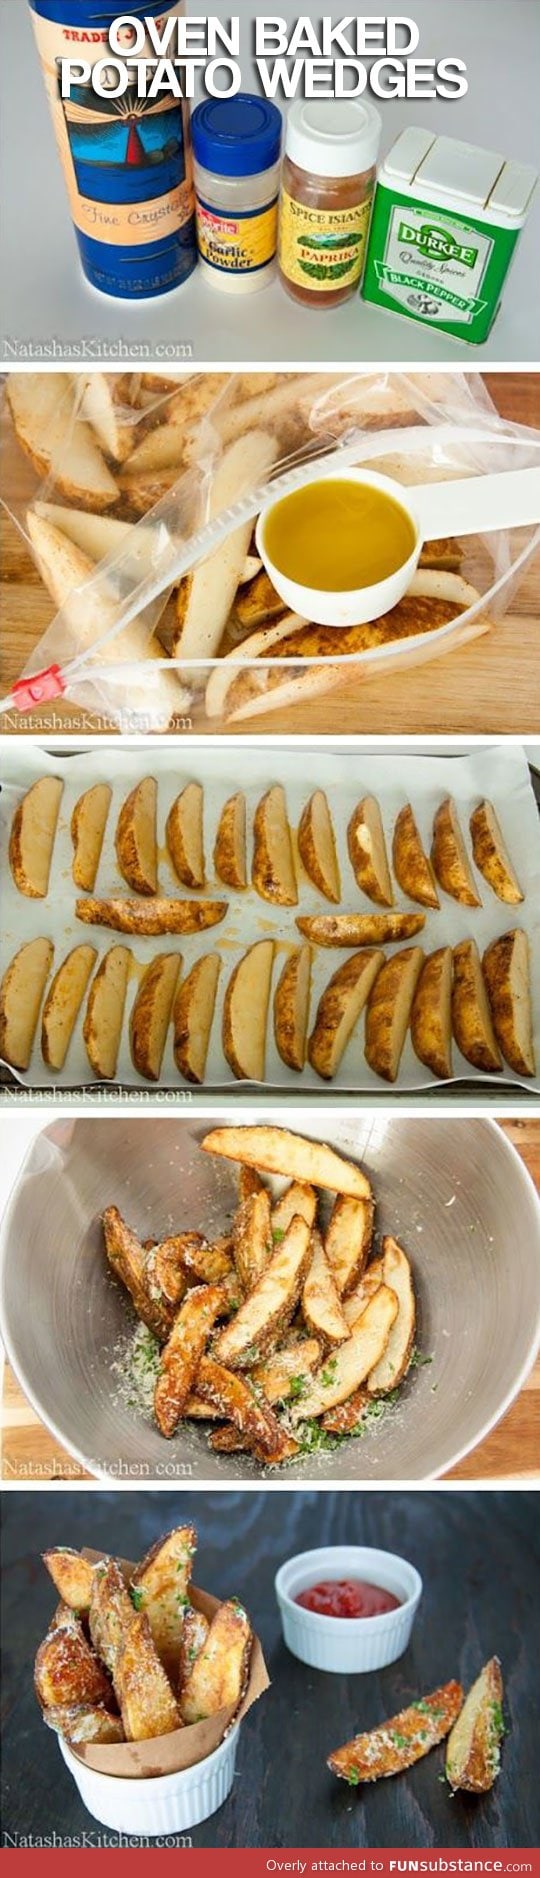 Delicious oven baked potato wedges to die for